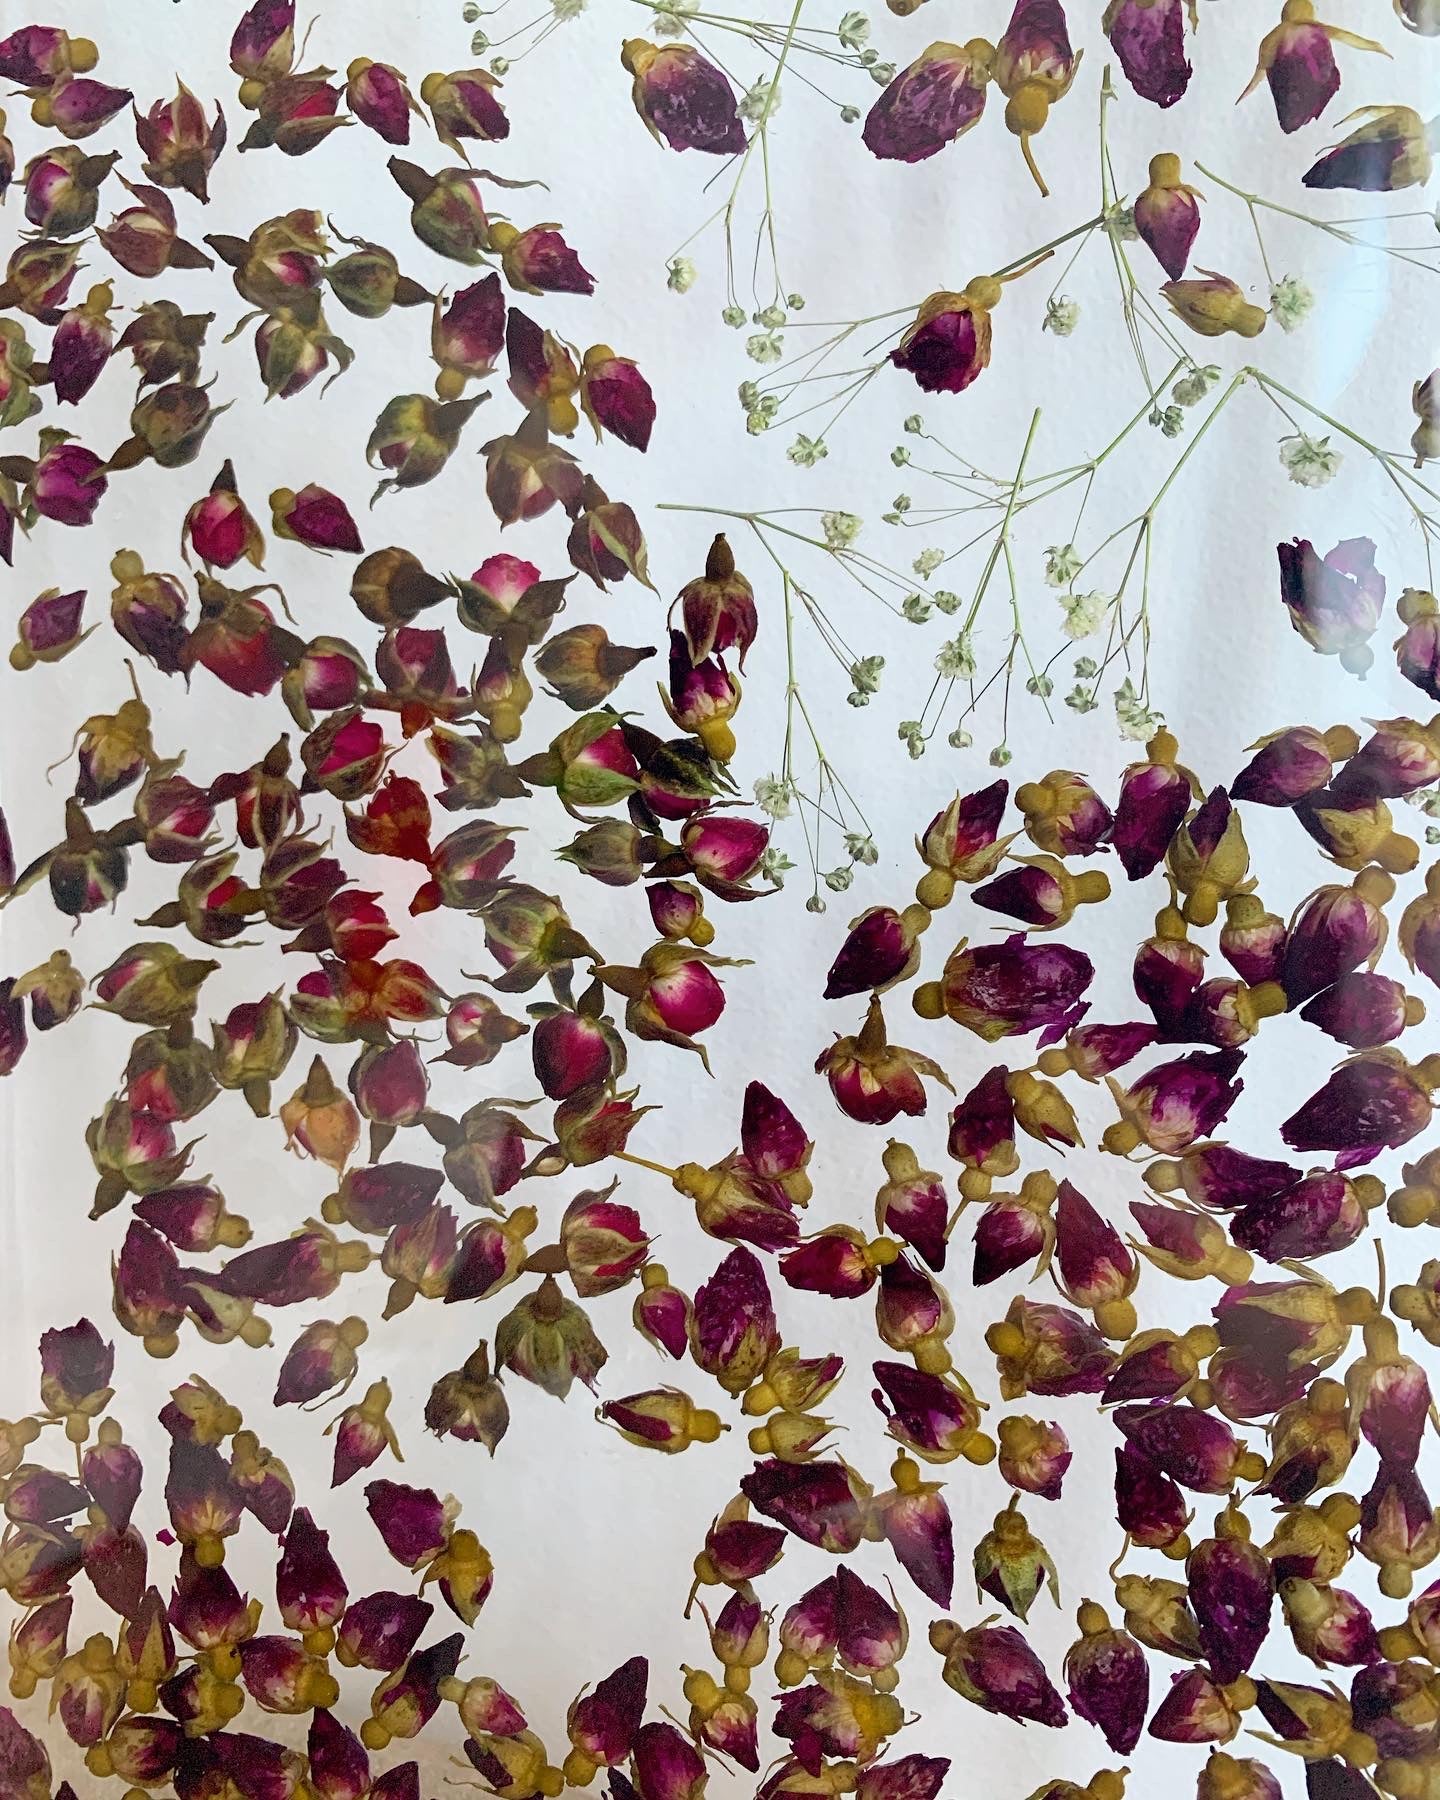  Hundreds of rosebuds sit suspended between sprigs of baby's breath. A durable-yet-whimsical addition to your home decor. Serve cocktails, use as a vanity tray, or simply display as an incredible objet d'art.